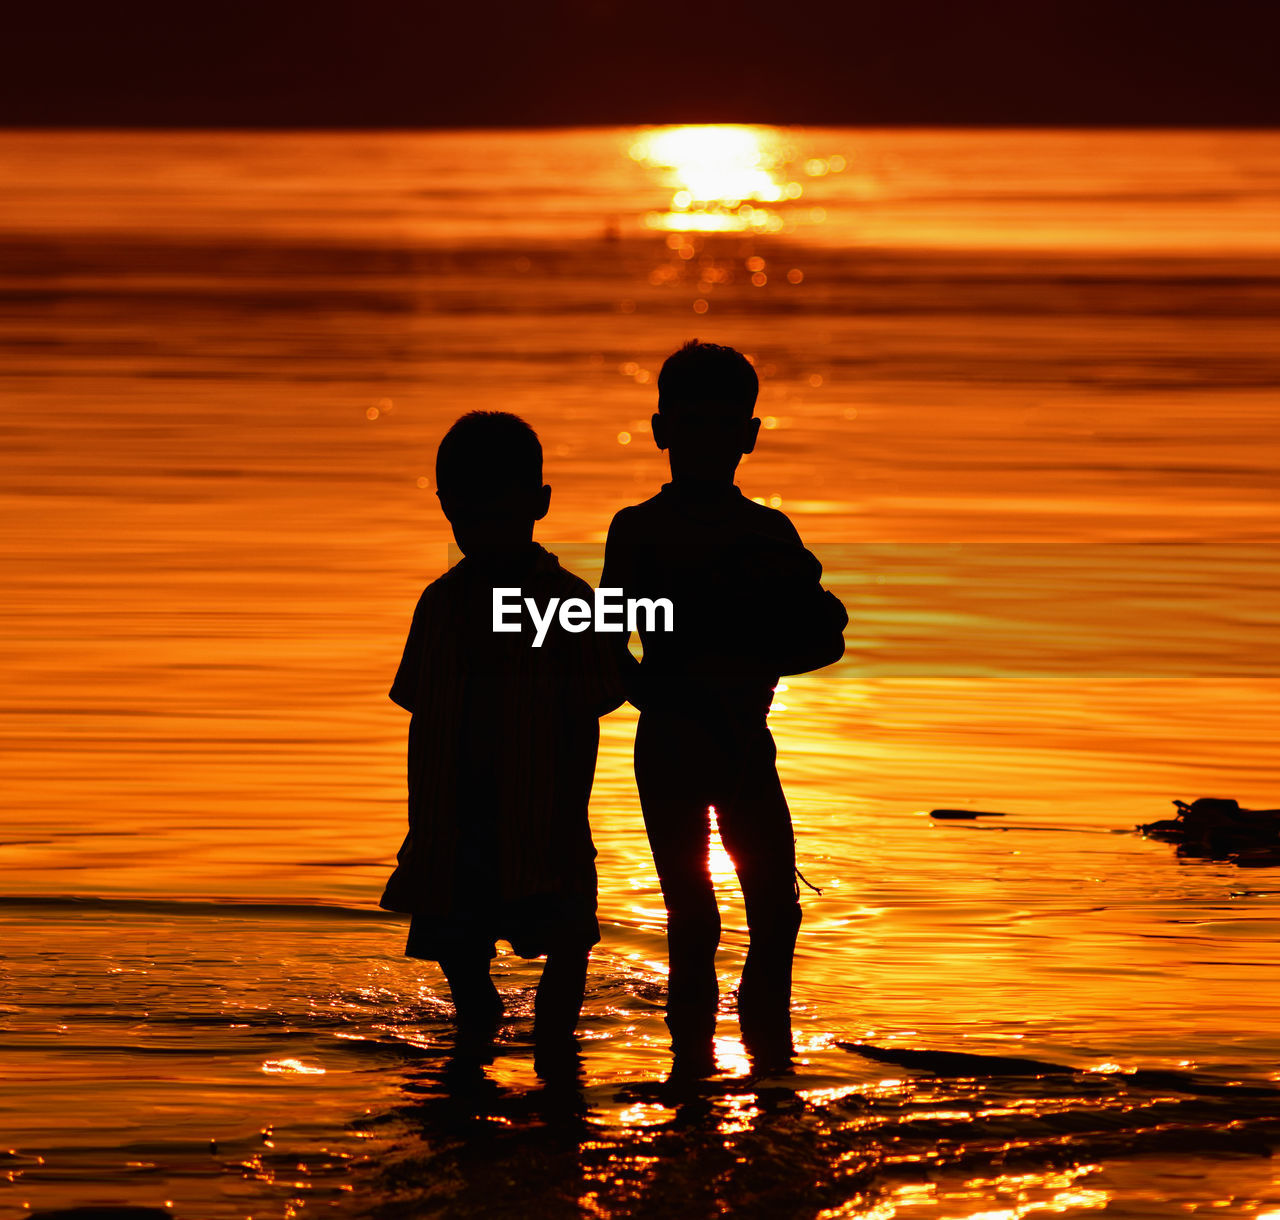 Silhouette children standing in water on shore at beach